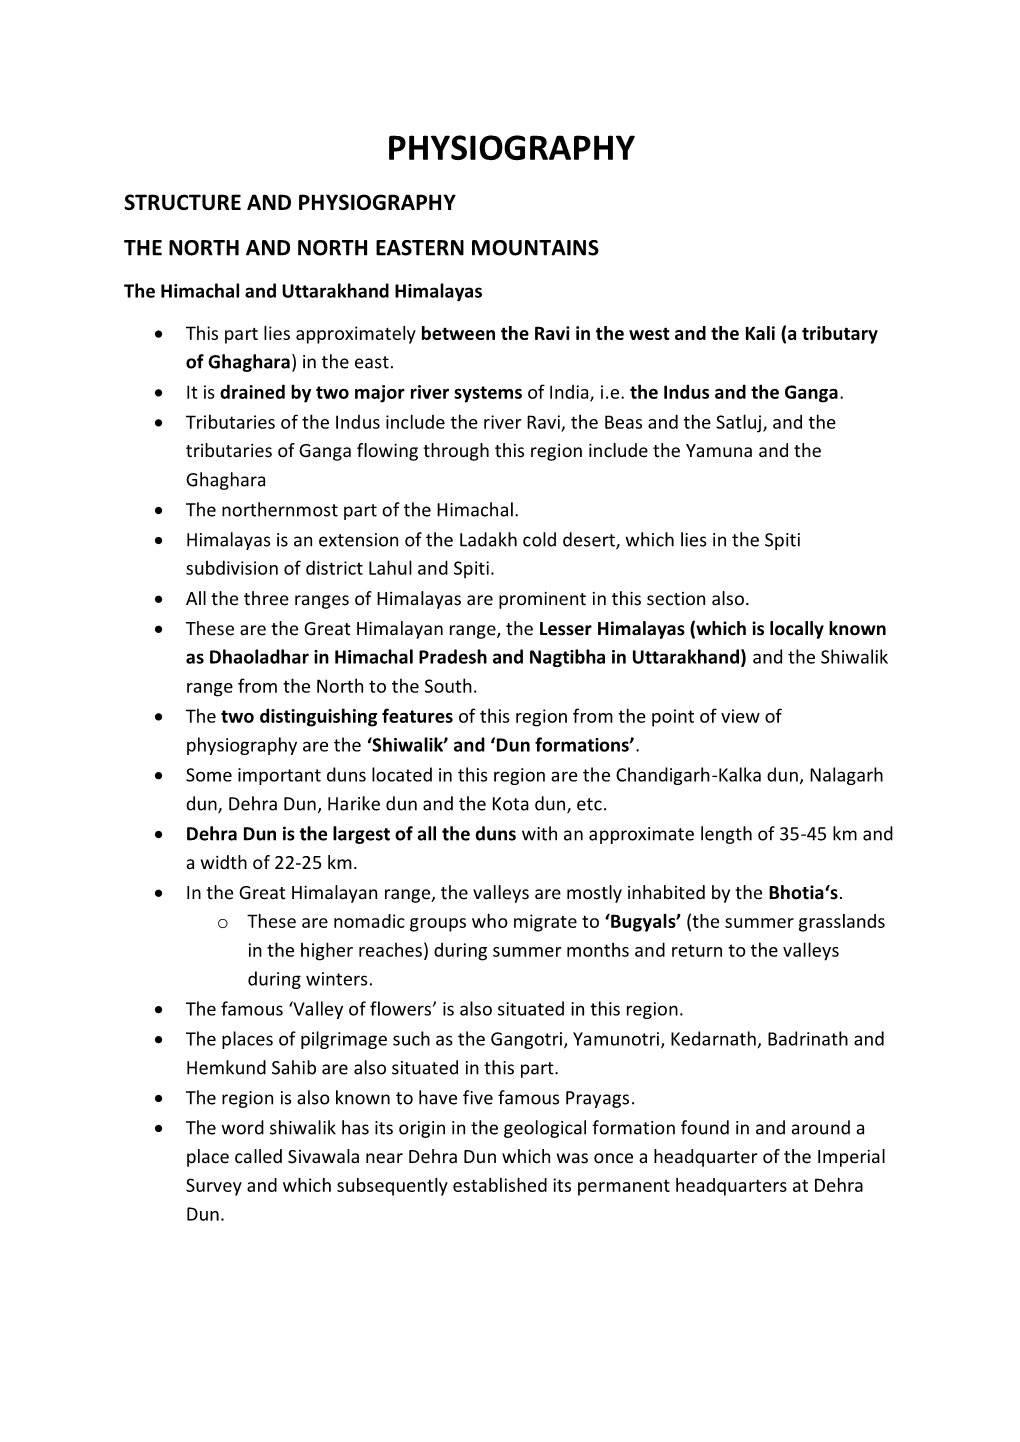 Physiography Structure and Physiography the North and North Eastern Mountains